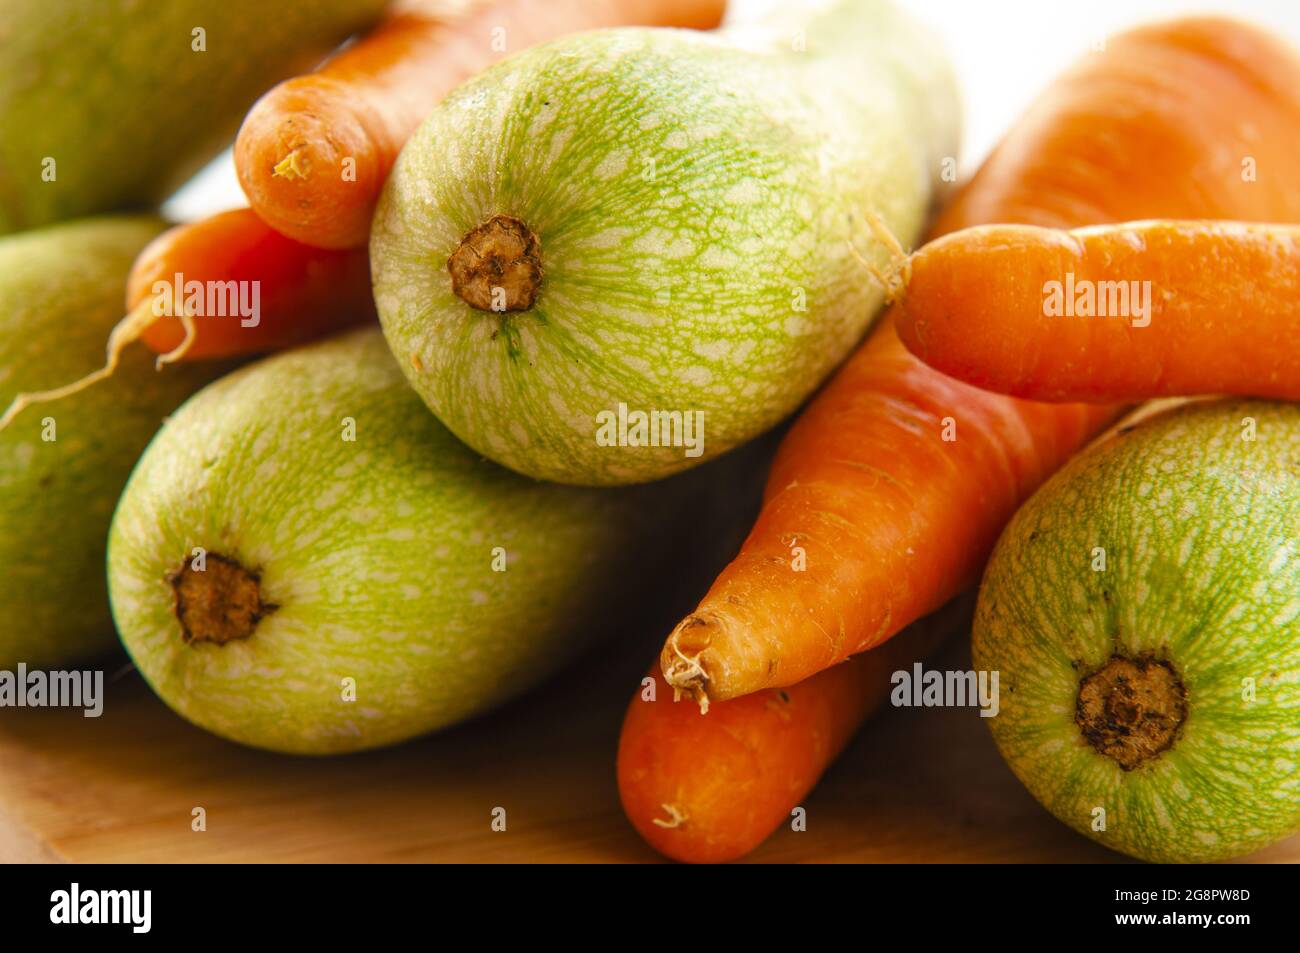 Closeup of freshly picked carrots and zucchinis placed together on a wooden surface Stock Photo